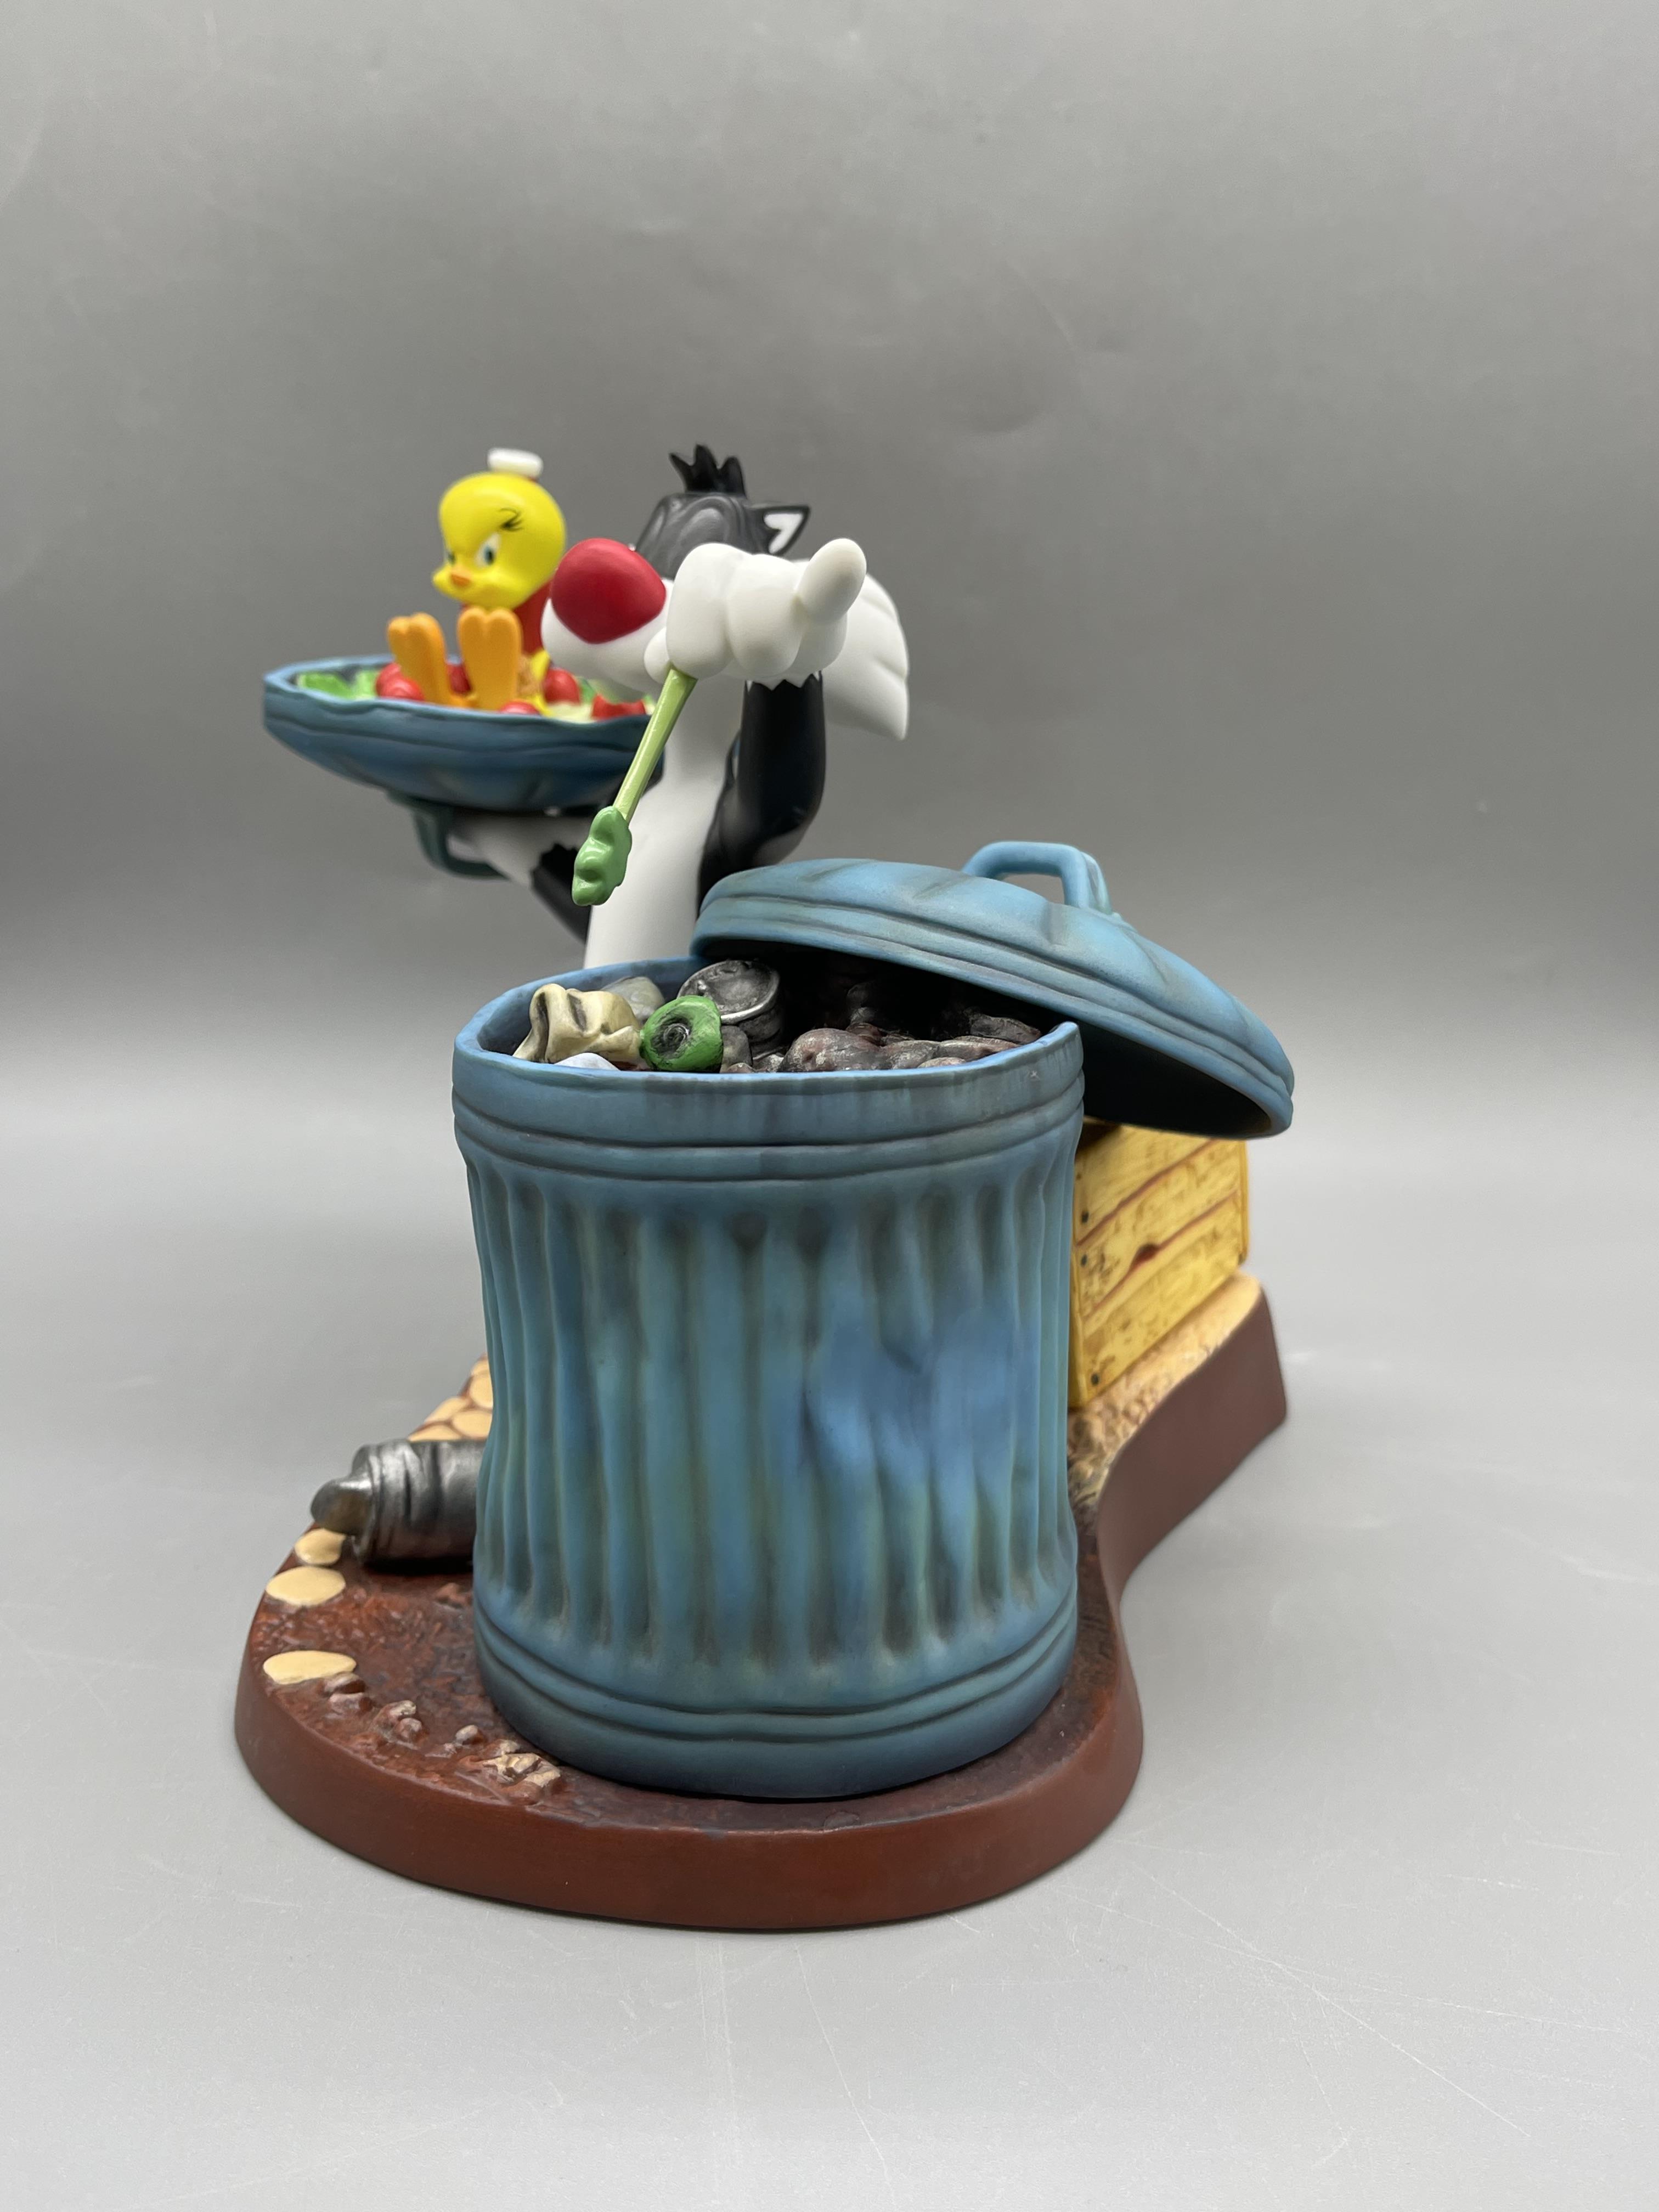 Boxed Wedgewood - Looney Tunes - Sylvester's Buffe - Image 4 of 18